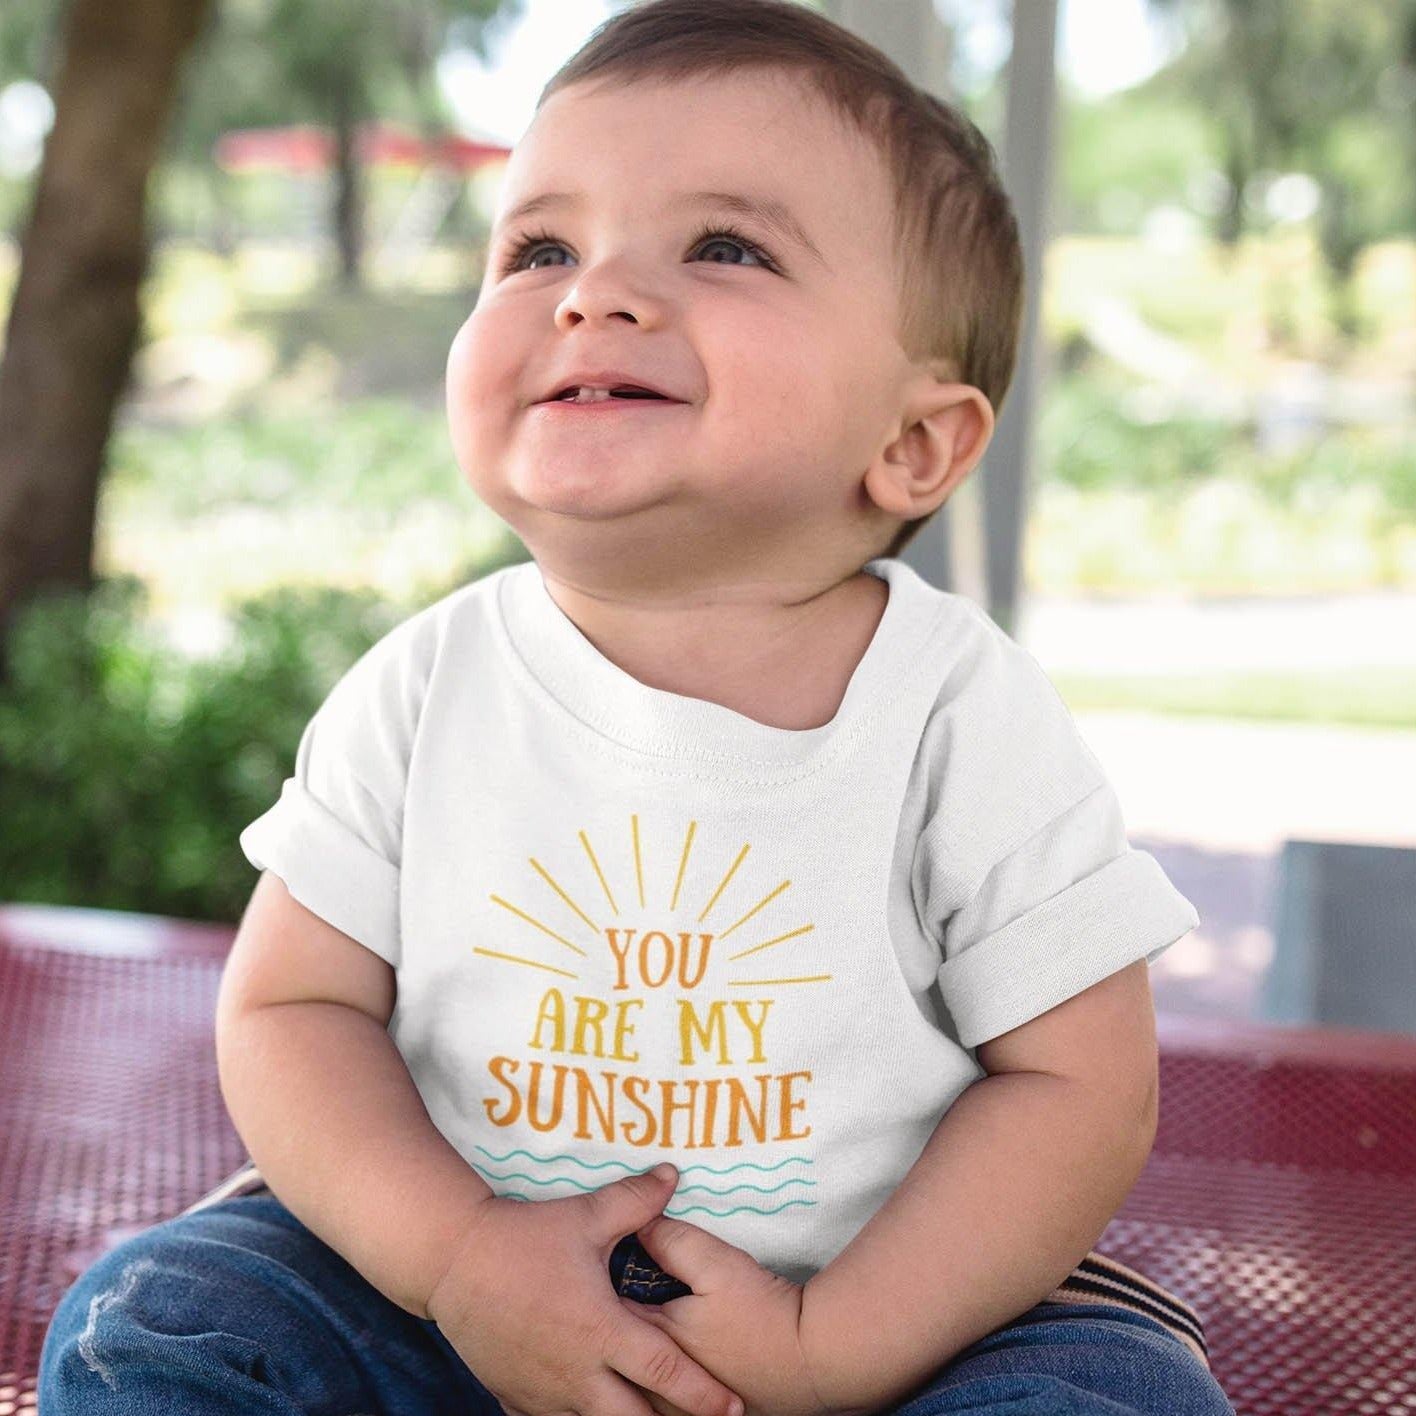 You Are My Sunshine - Kids Youth Crew T-Shirt Kids Youth T-shirt Summer